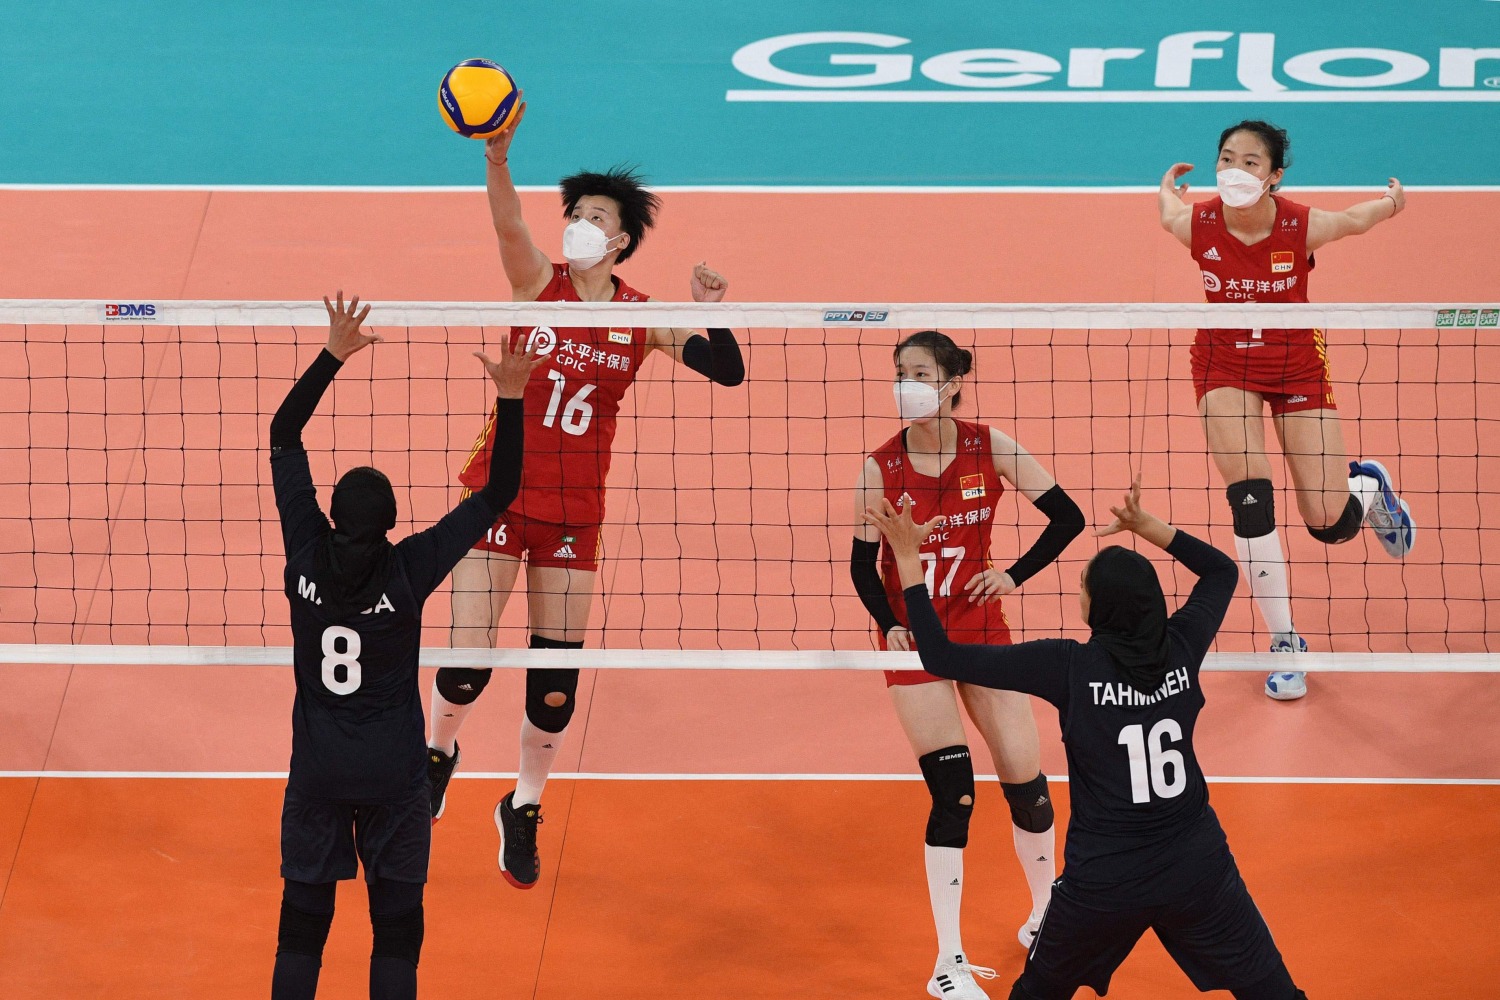 China's volleyball team wears Covid masks in a game, sparking ...